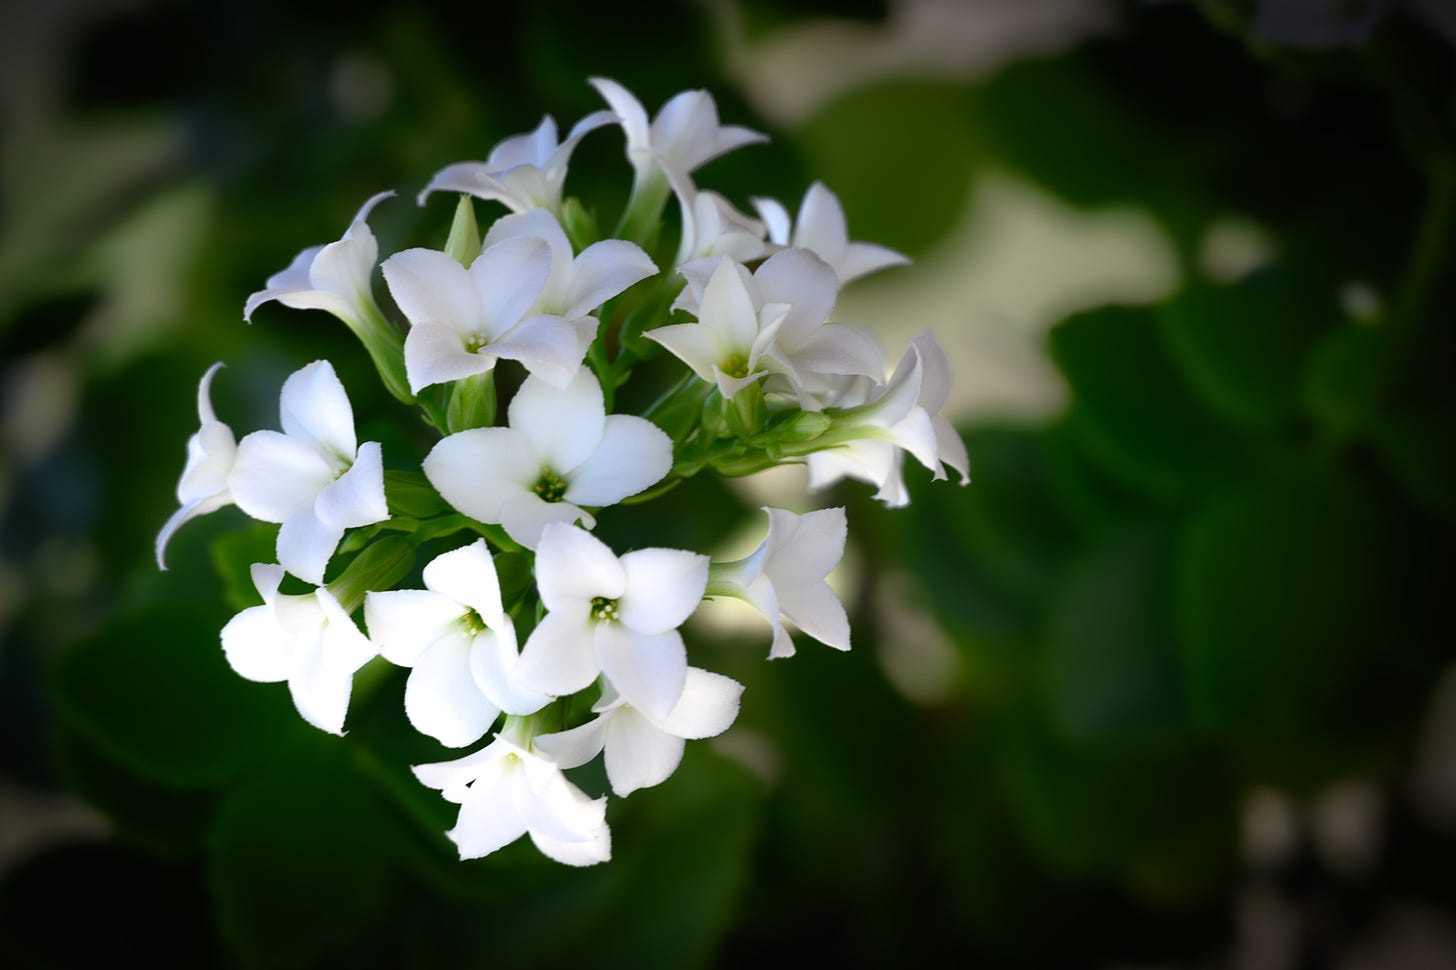 Small delicate white blossoms of a kalanchoe plant